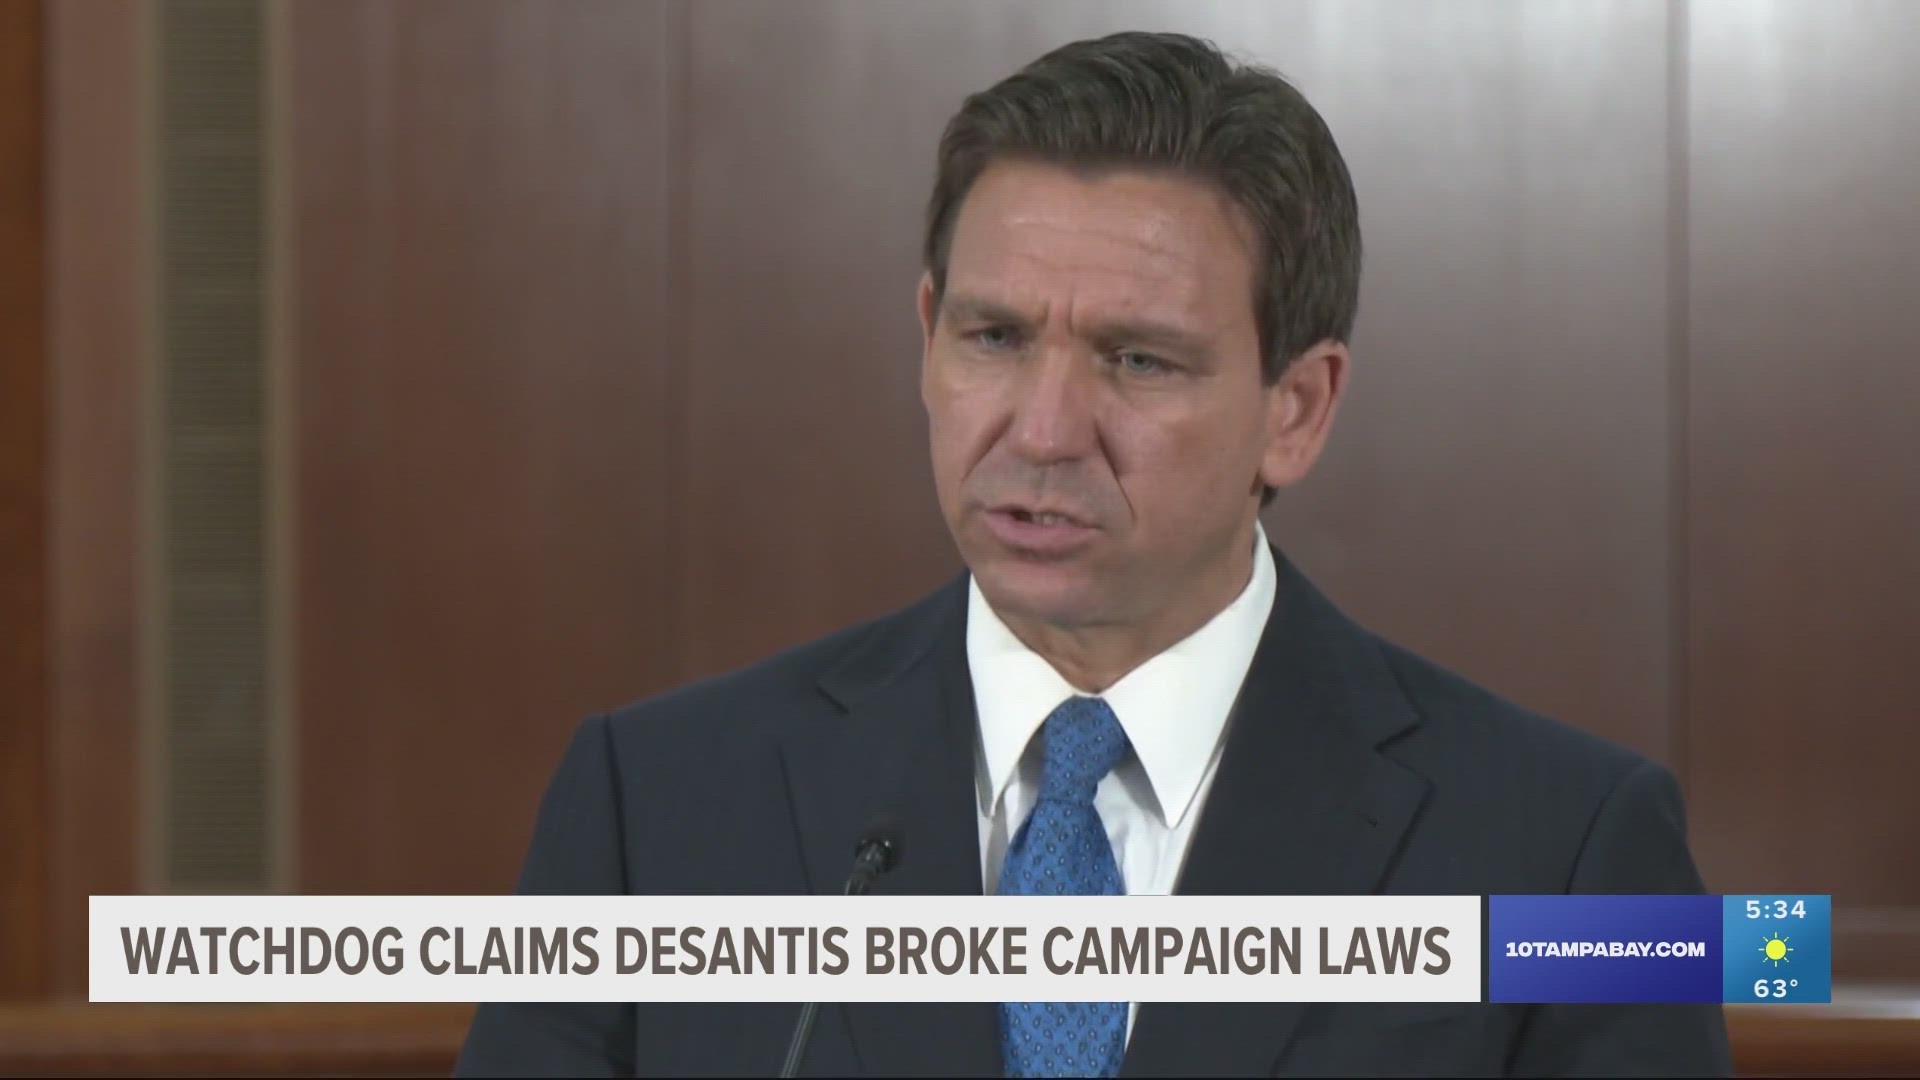 In a statement, DeSantis spokesman Andrew Romeo said the complaint was “baseless” and rooted in “unverified rumors and innuendo.”